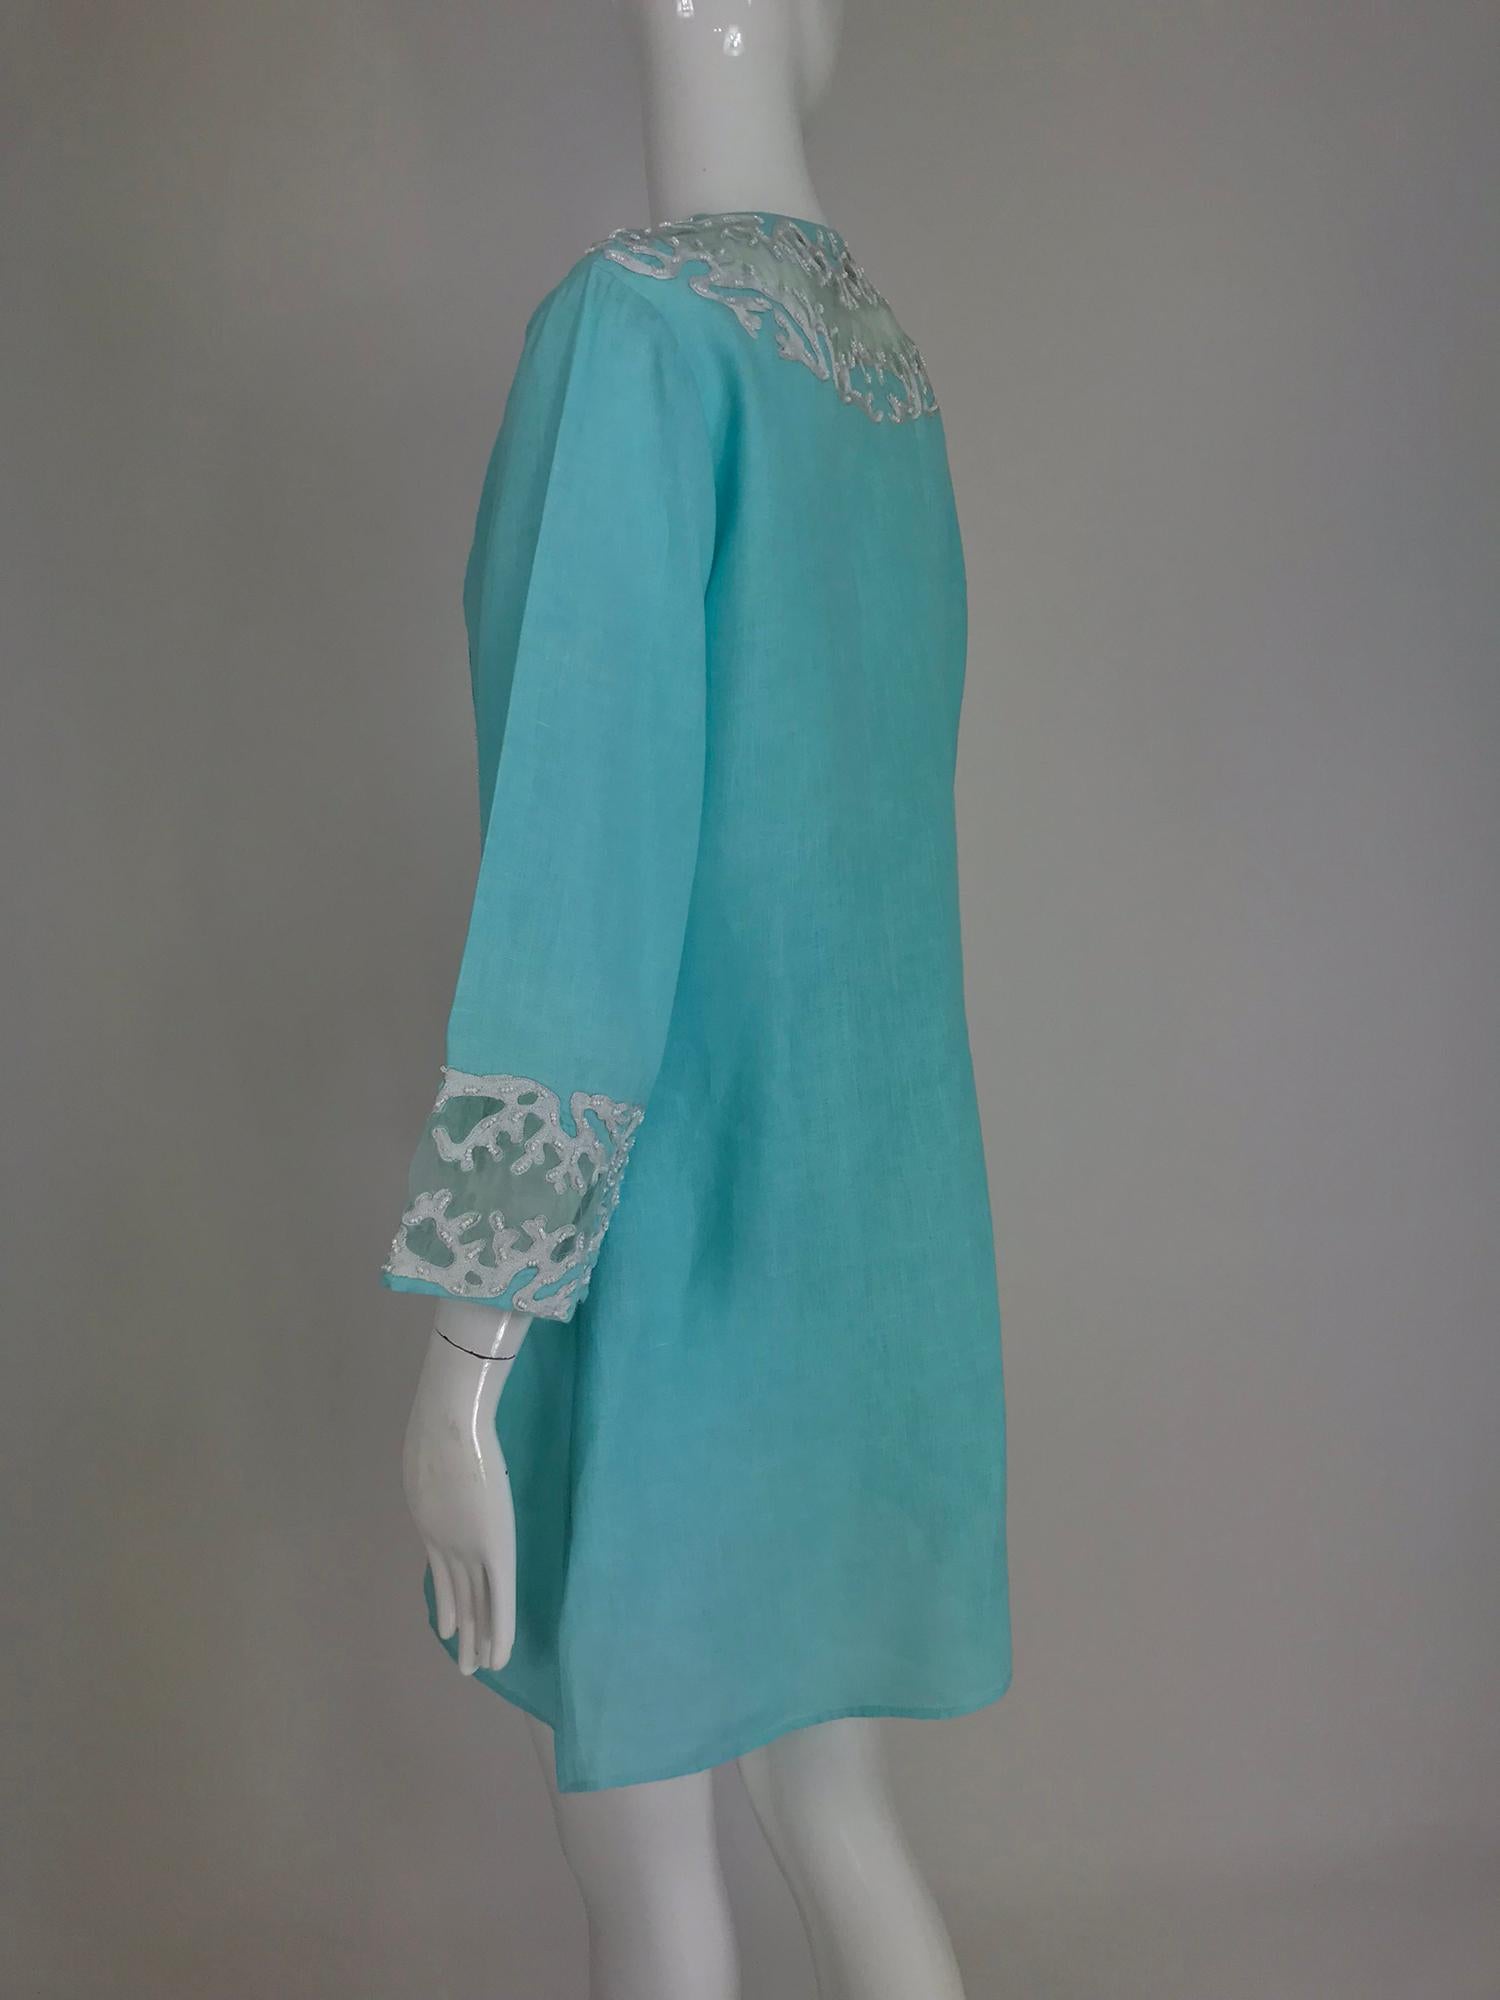 Jeannie McQueeny turquoise linen embroidered silk organza long jacket.  1